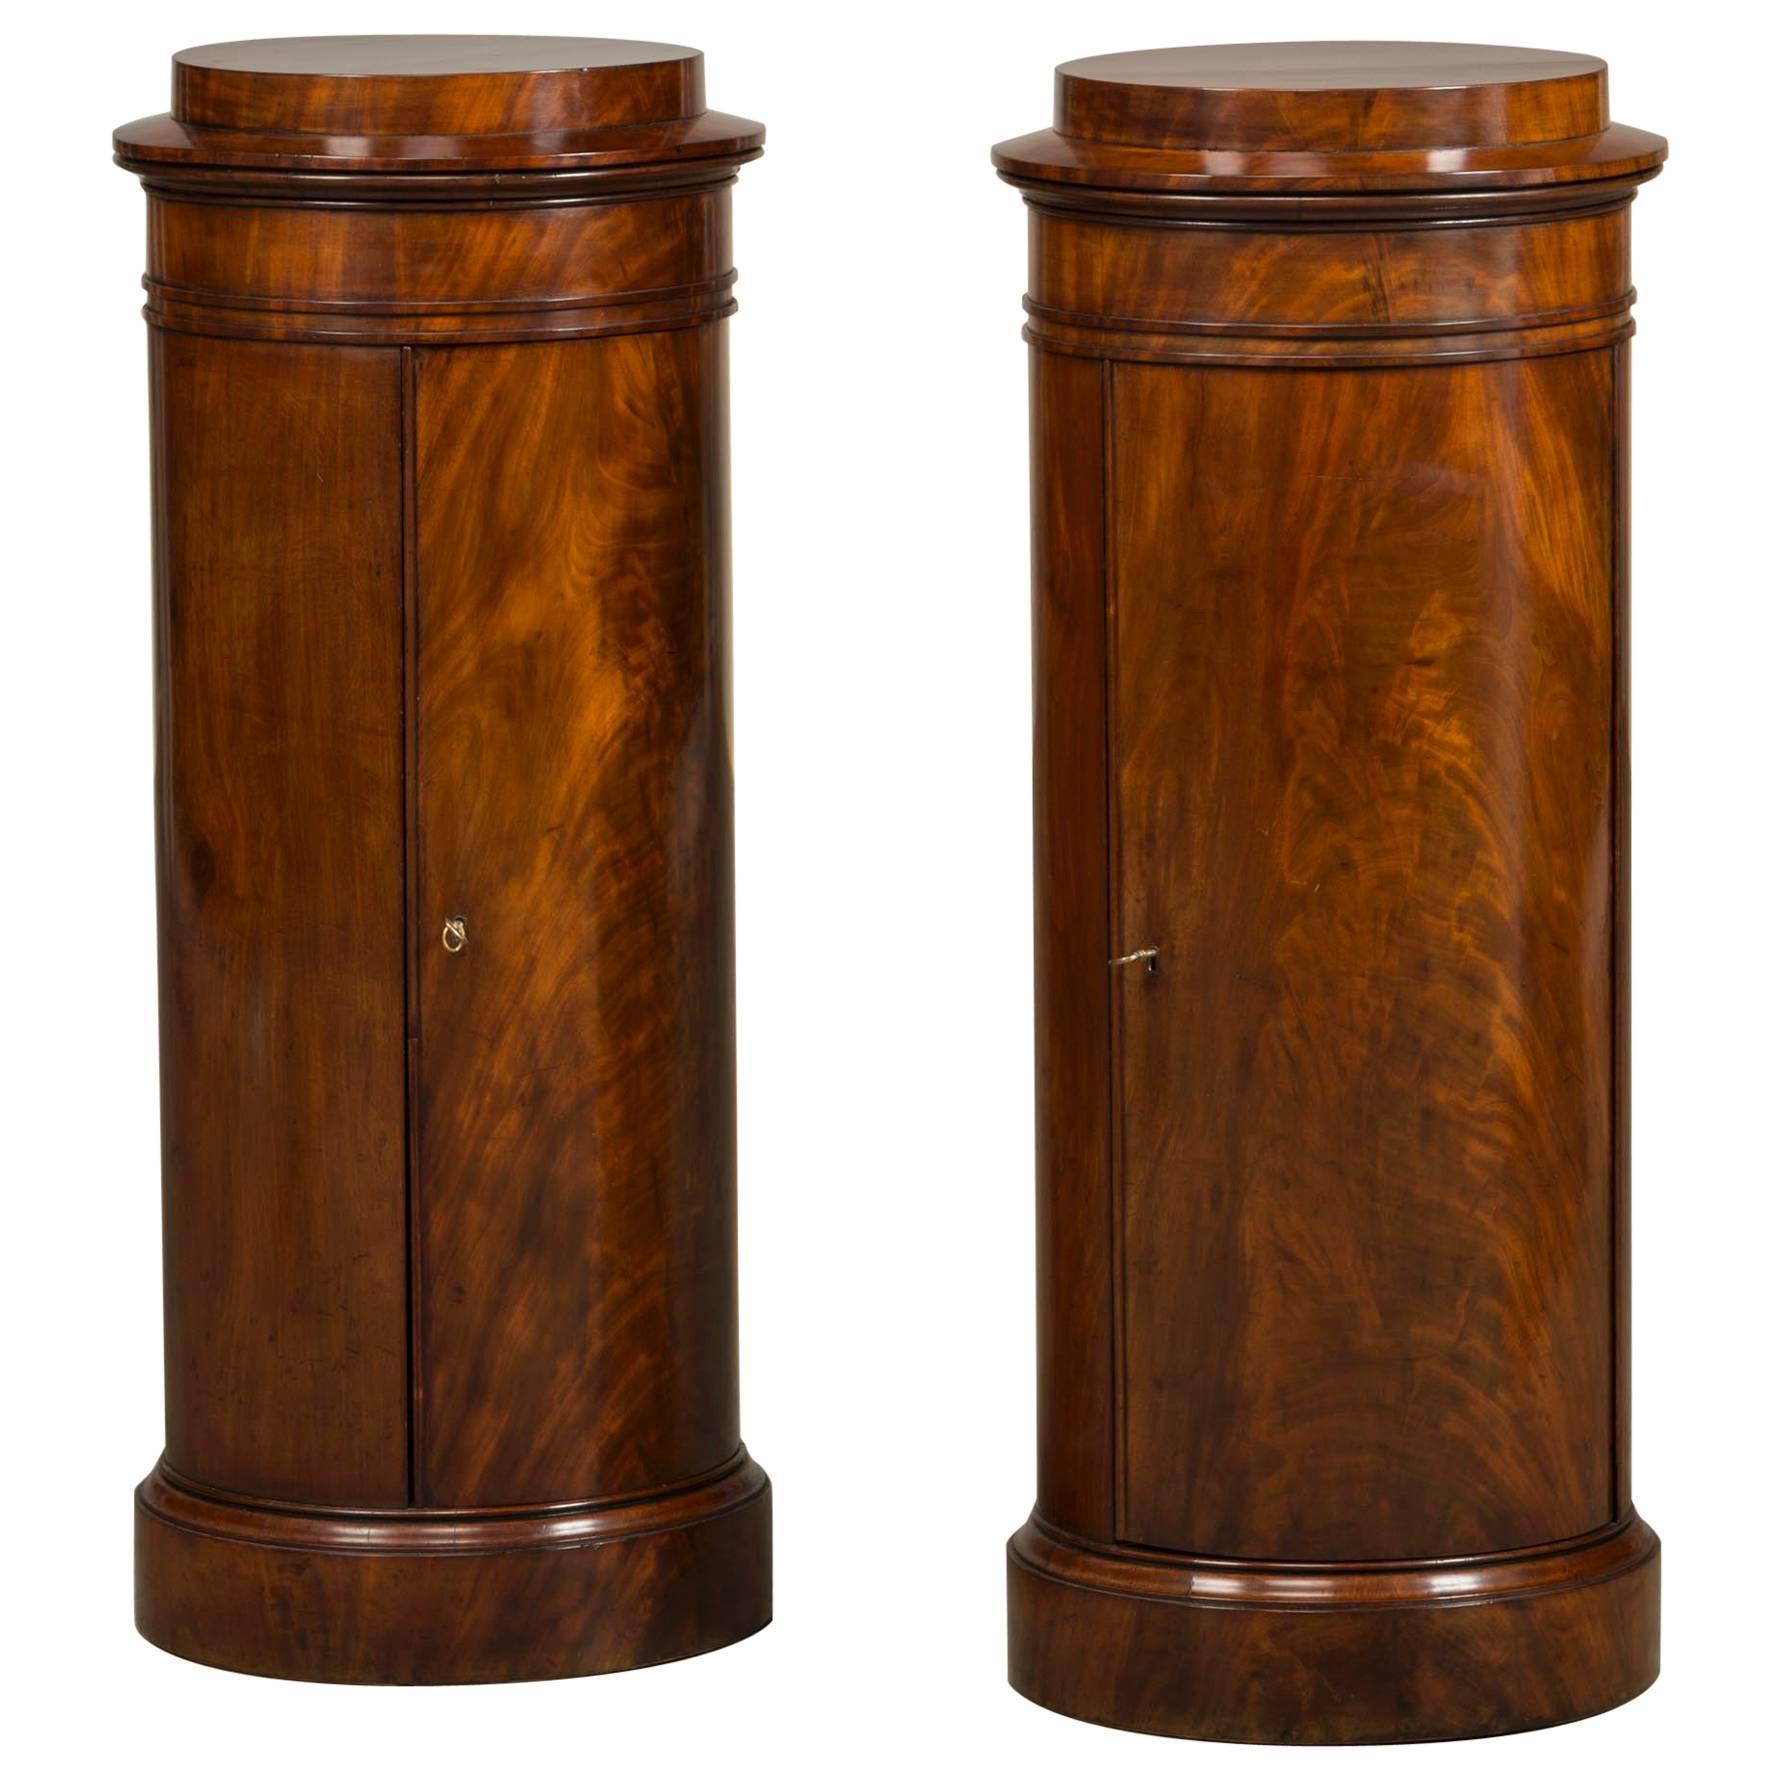 Rare Pair of Round Late Empire Pedestal Cabinets